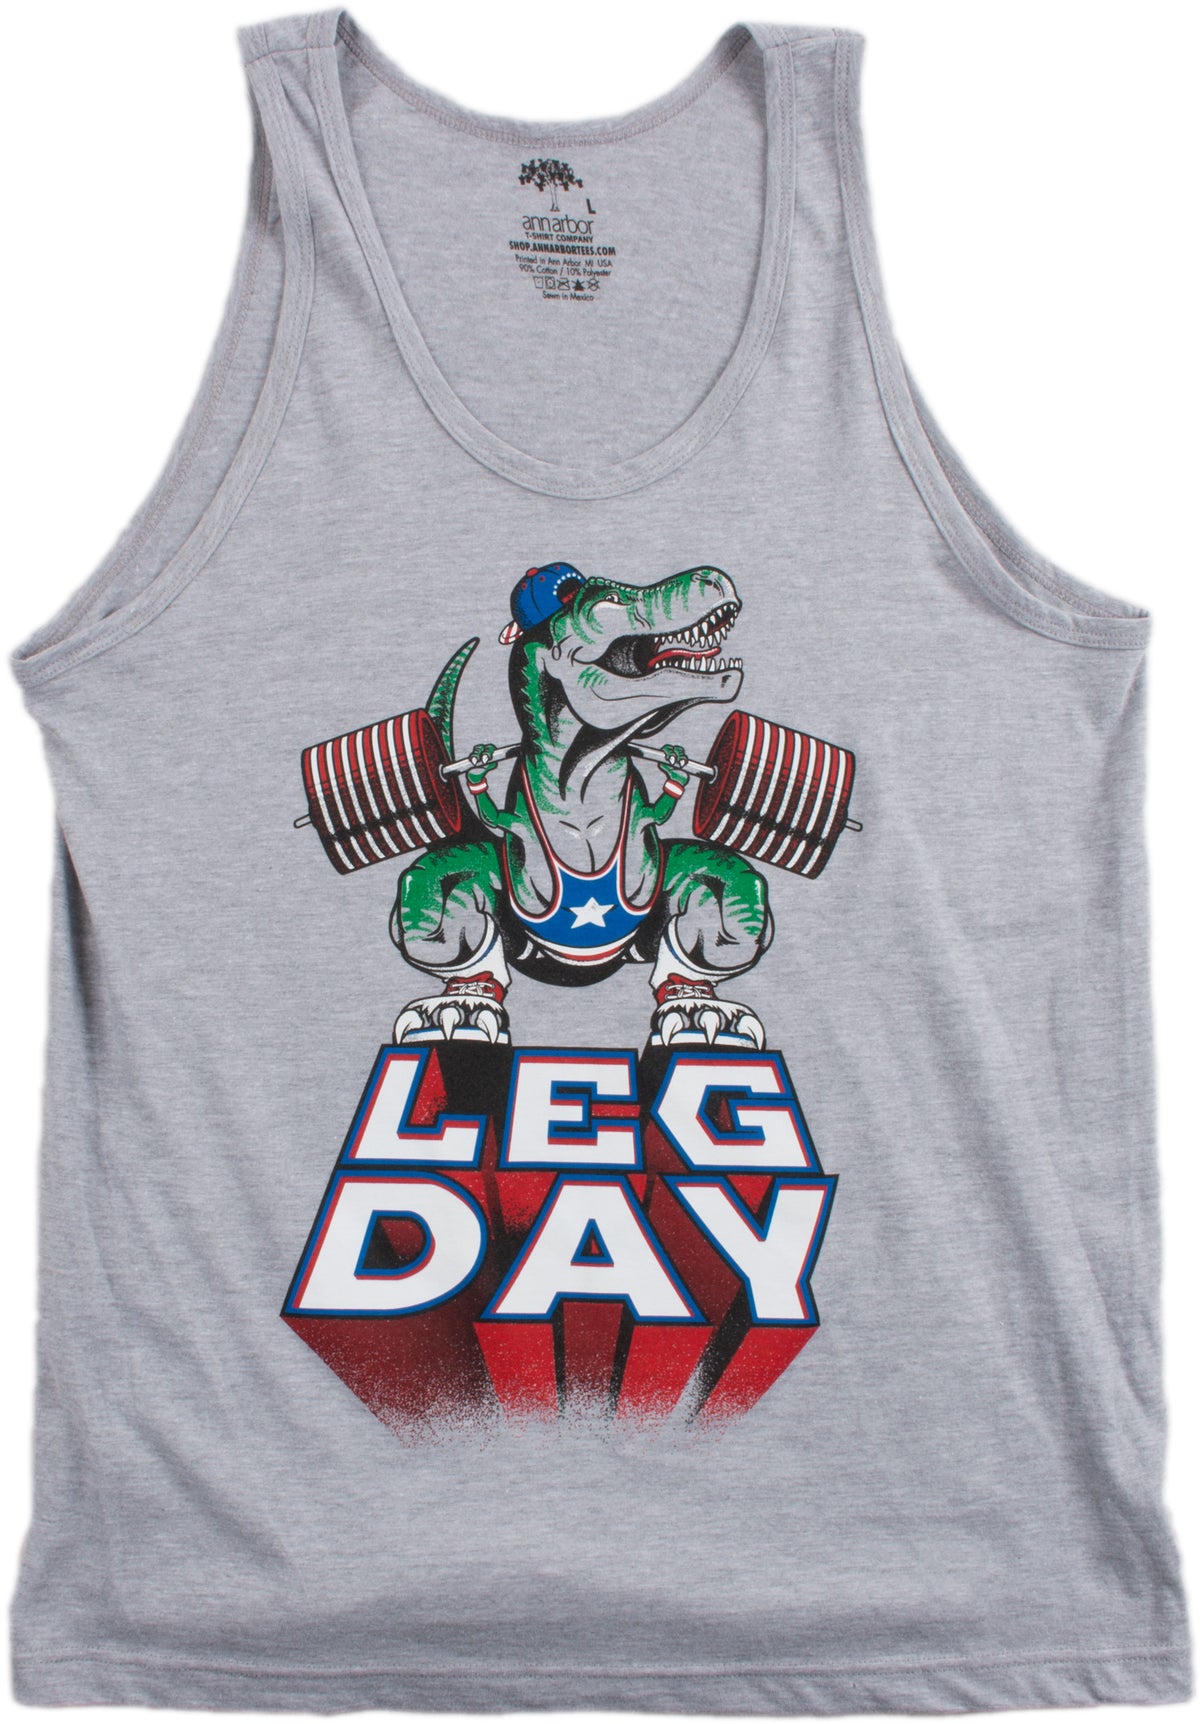 LEG DAY | Funny Weight Lifting Olympic Barbell Training Squat Workout Tank Top